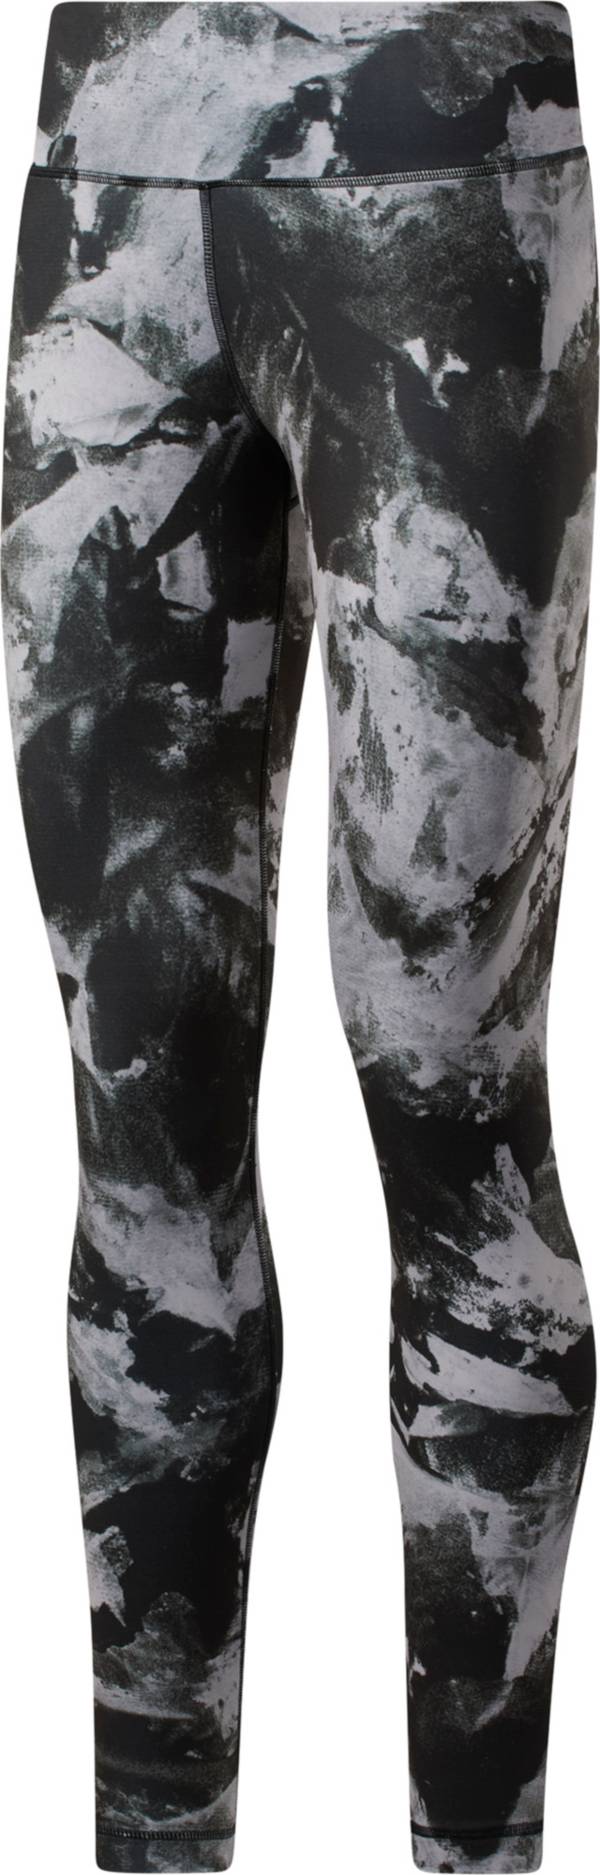 Reebok Women's Meet You There Leggings product image